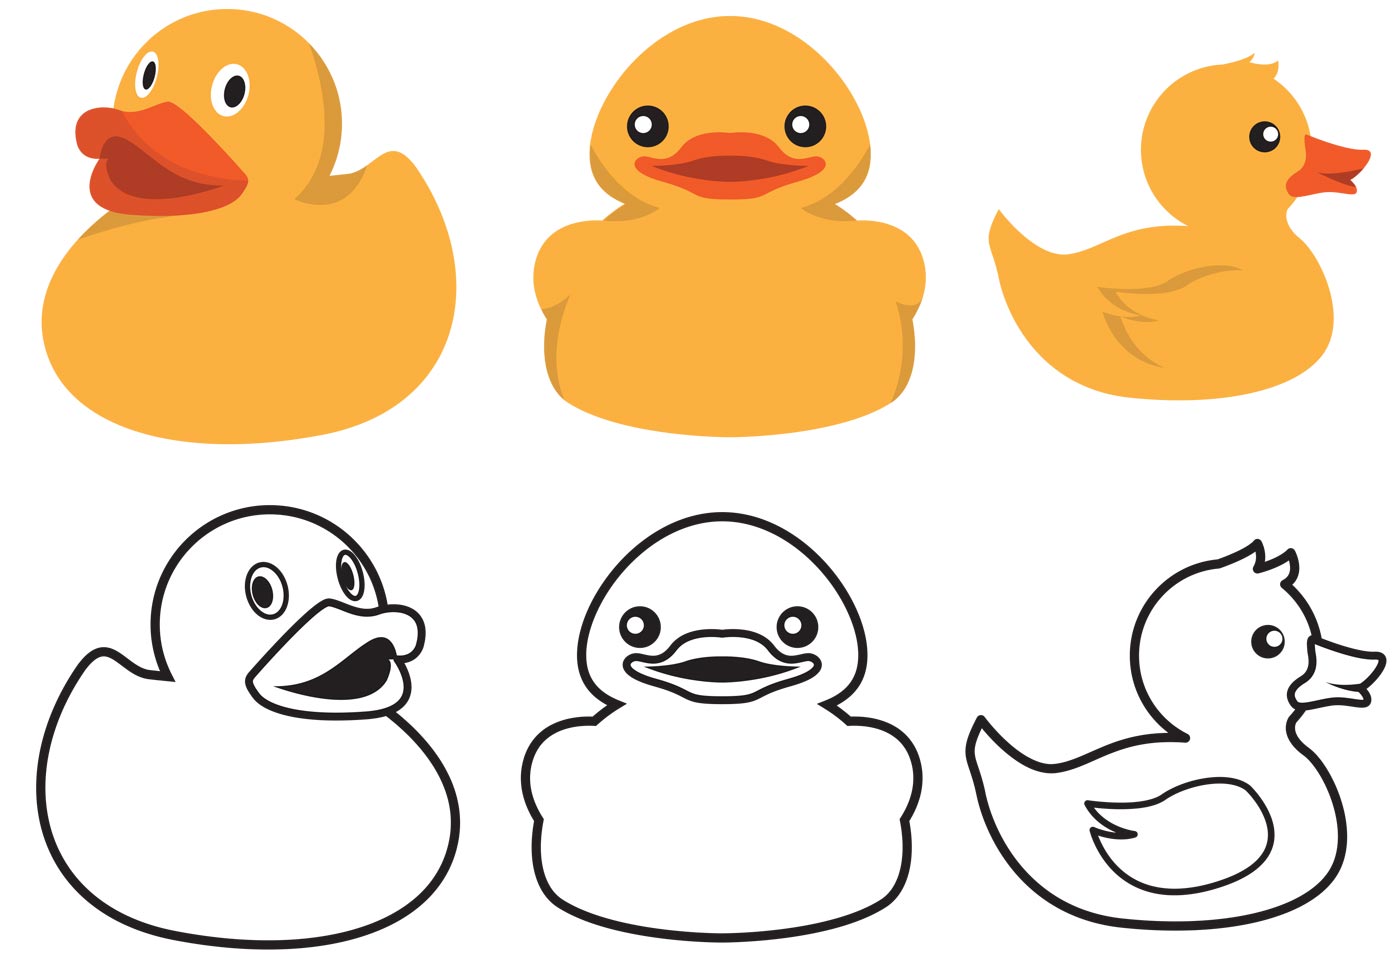 Rubber Duck Color And Outline Vector - Download Free Vector Art, Stock